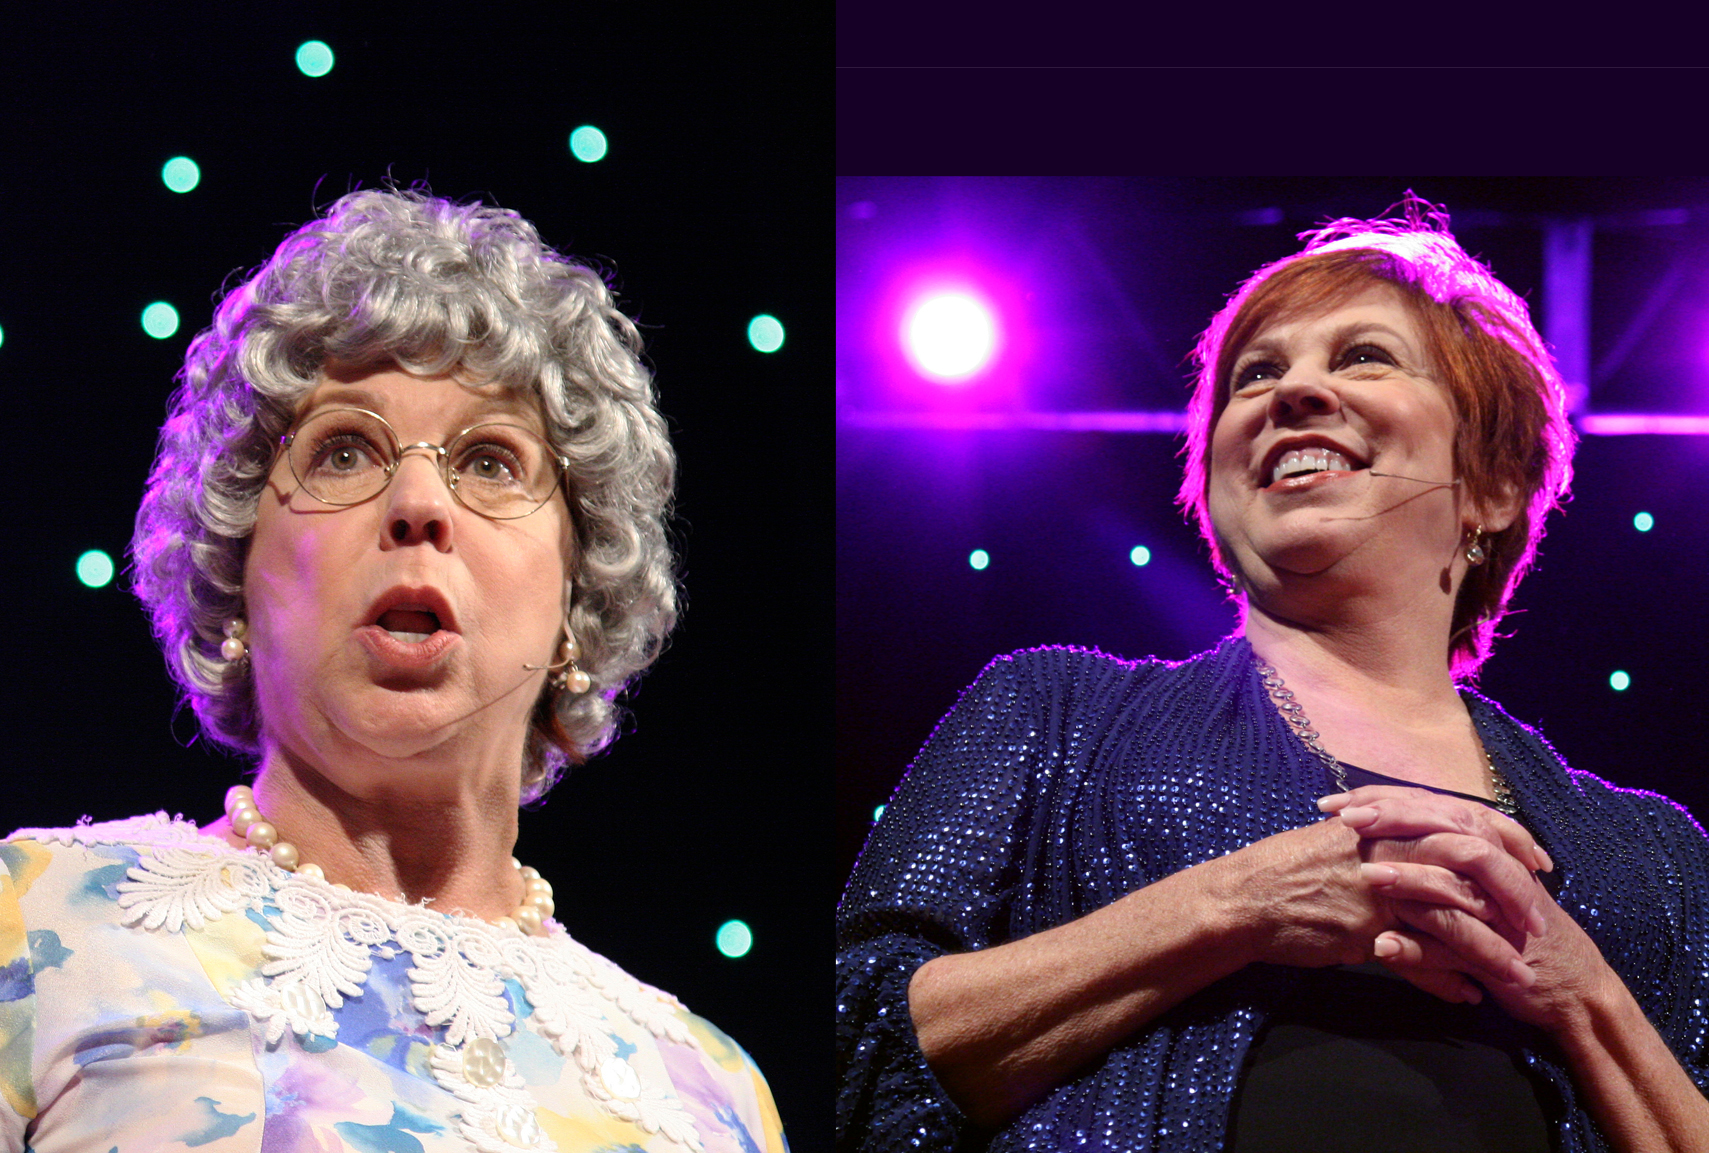 Vicki Lawrence delights expo crowd with her 'TwoWoman Show